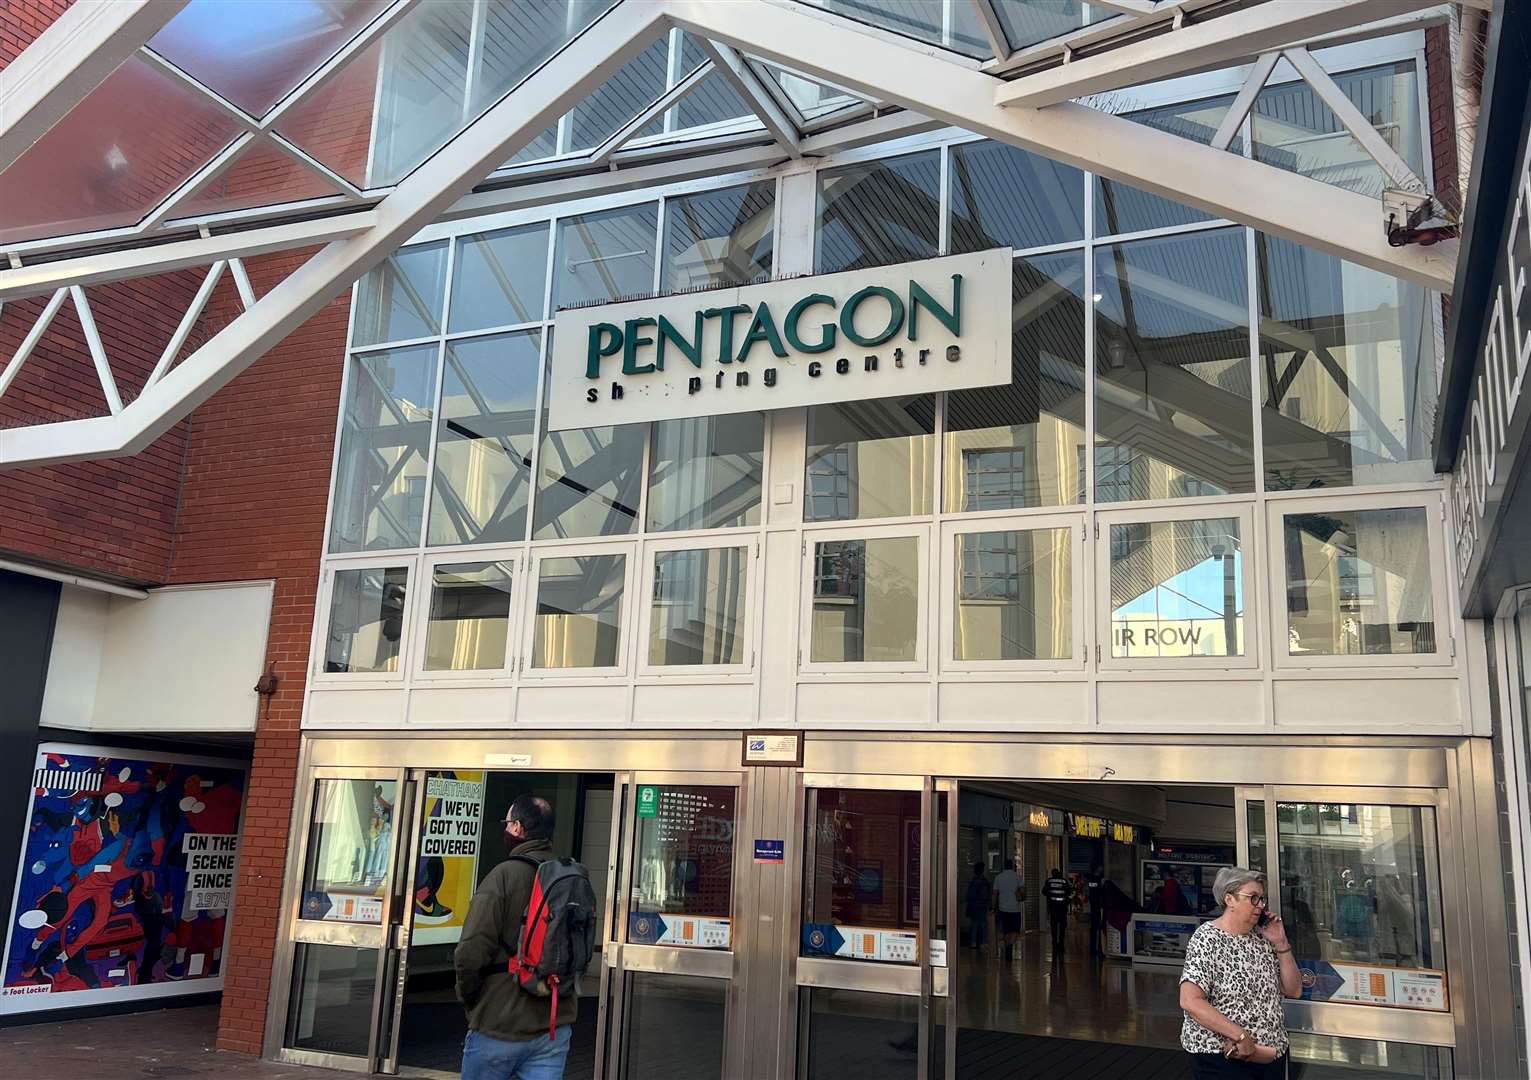 The Pentagon Shopping Centre was closed for a short time due to risks of flooding